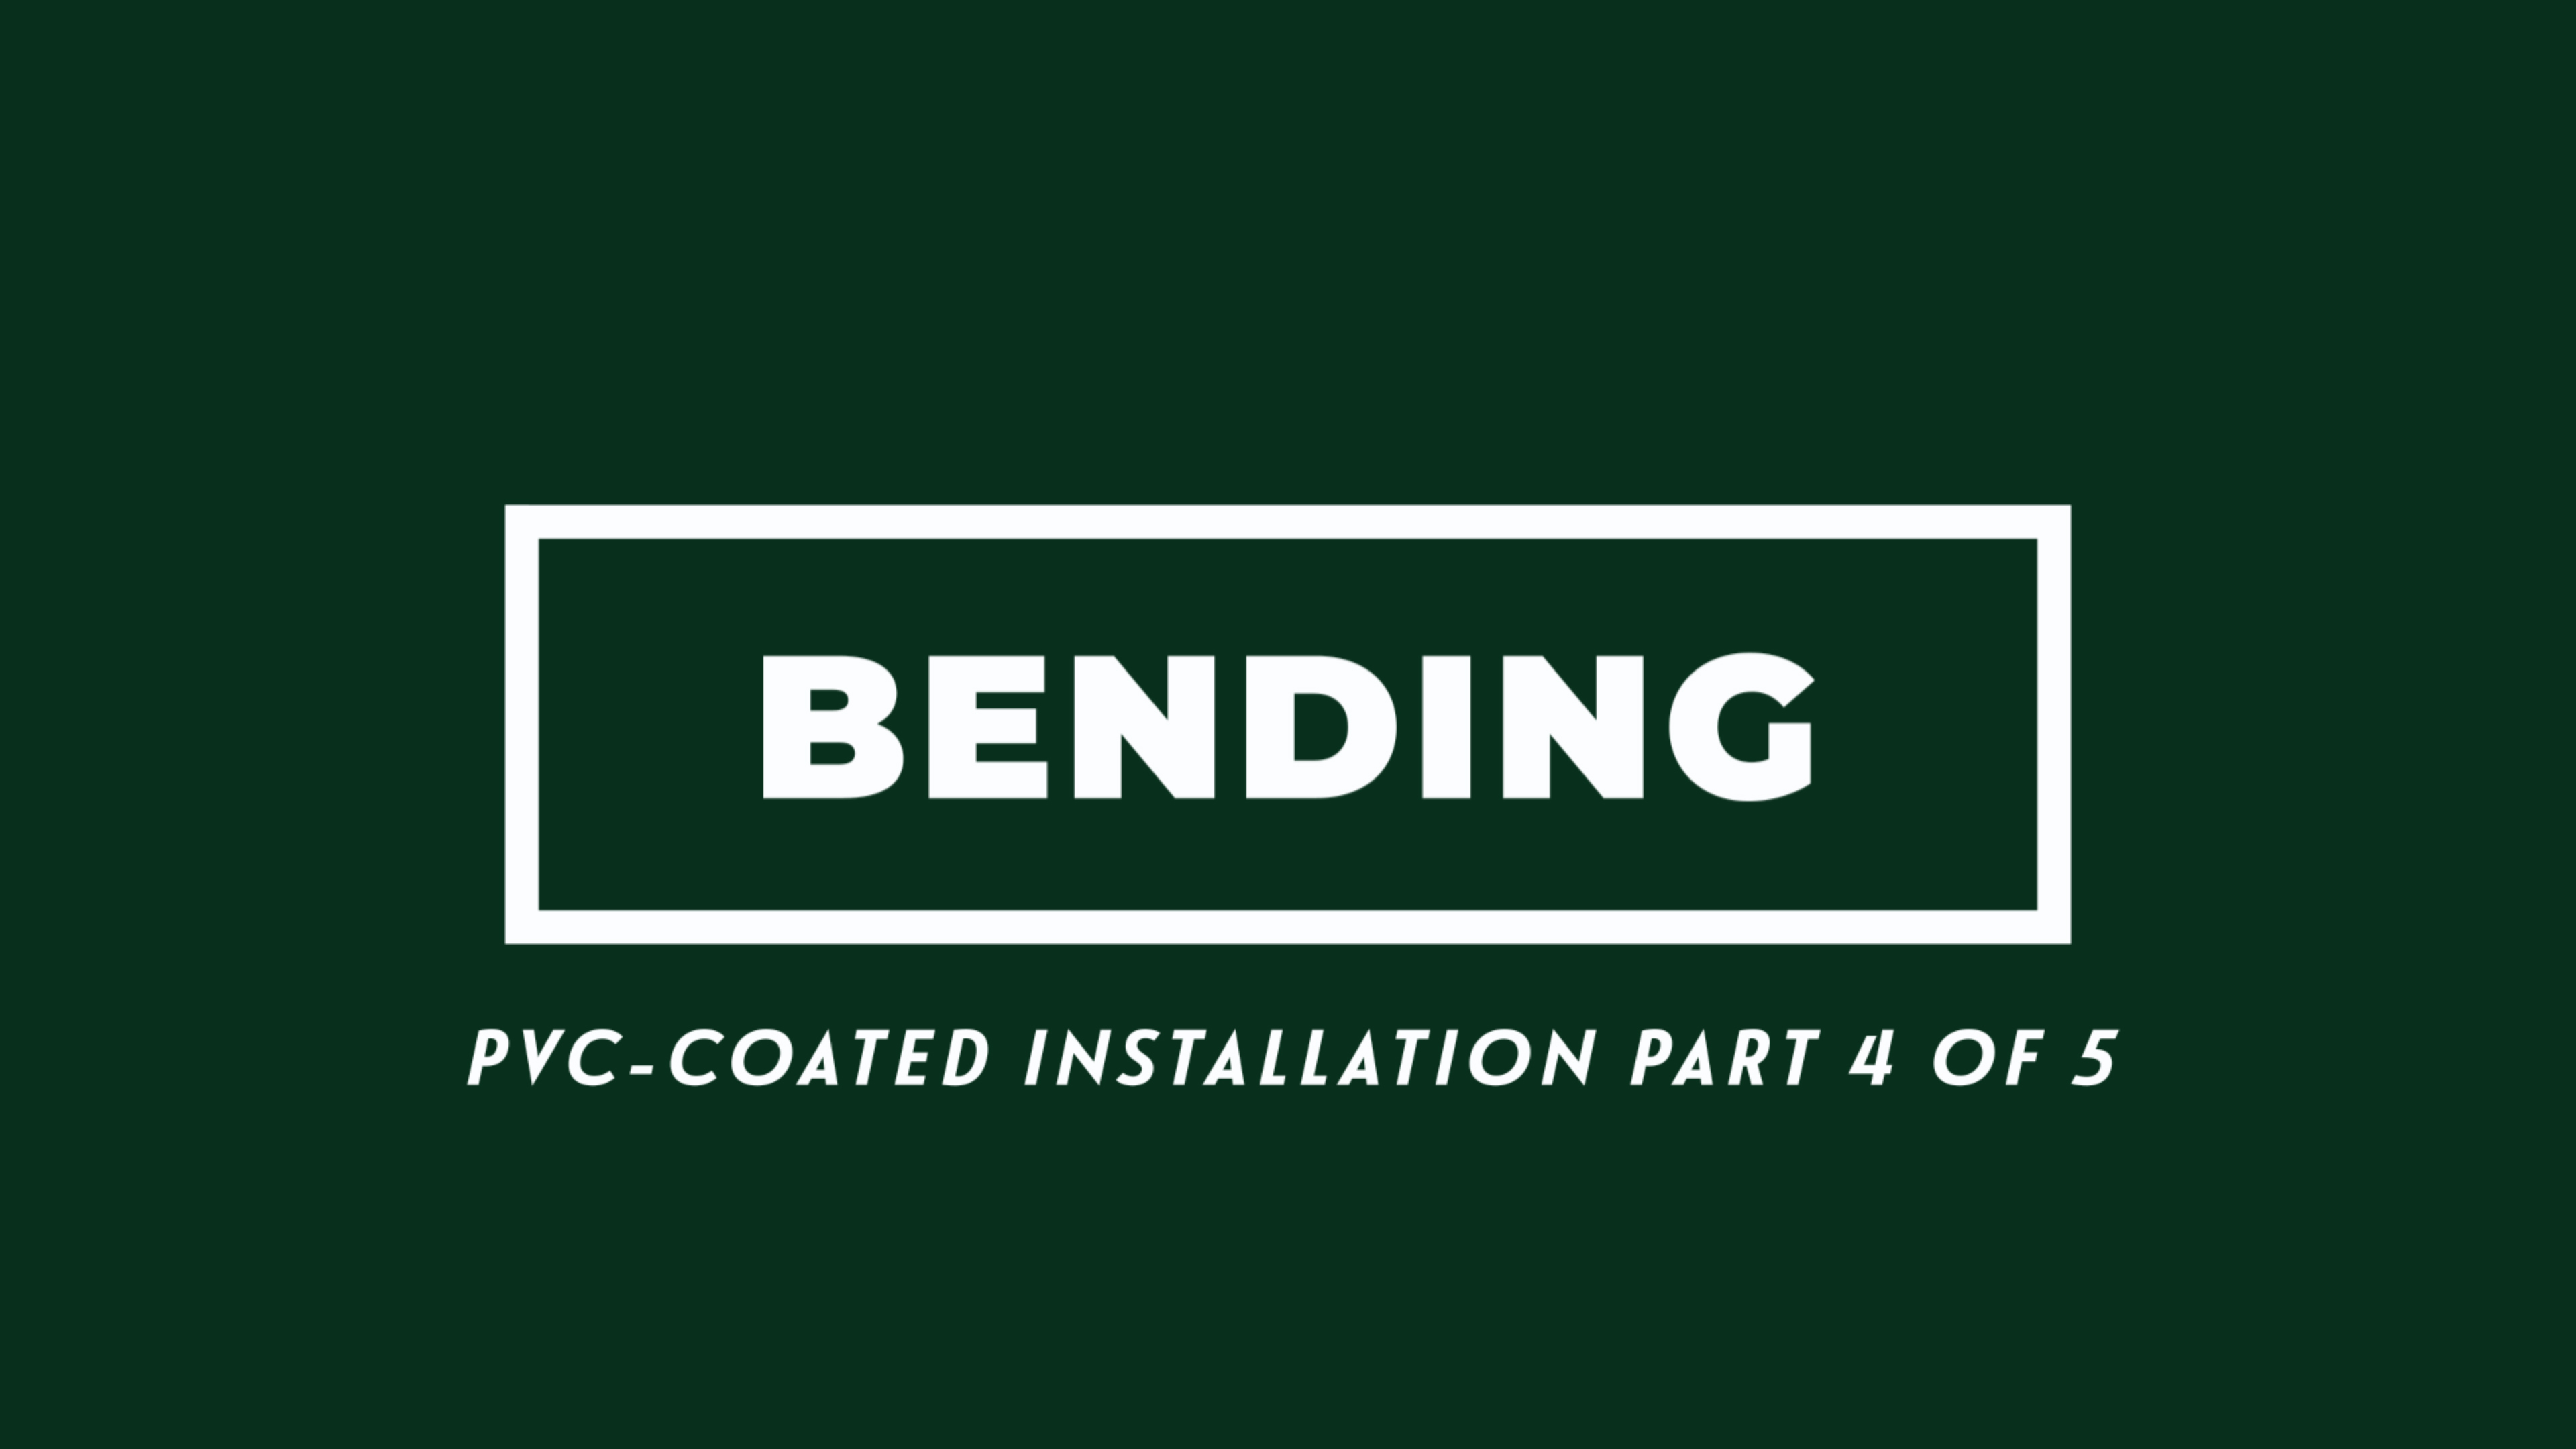 Bending - PVC-Coated Conduit Installation Part 4 of 5 Video